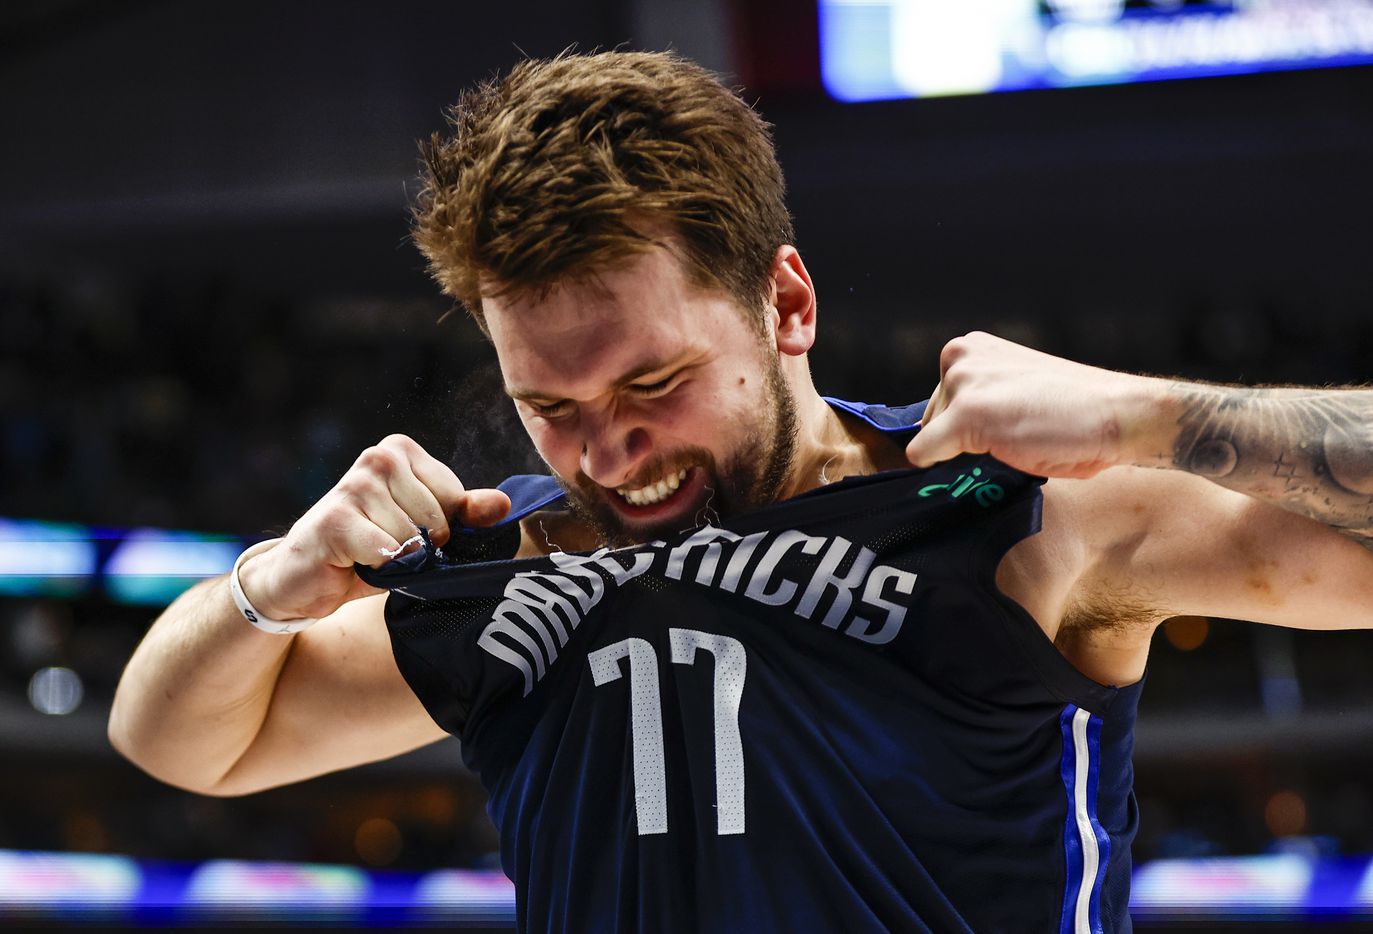 Dallas Mavericks guard Luka Doncic (77) rips his jersey in frustration after missing the game winning shot  after an NBA basketball game against the LA Clippers in Dallas, Saturday, February 12, 2022. LA won 99-97. 